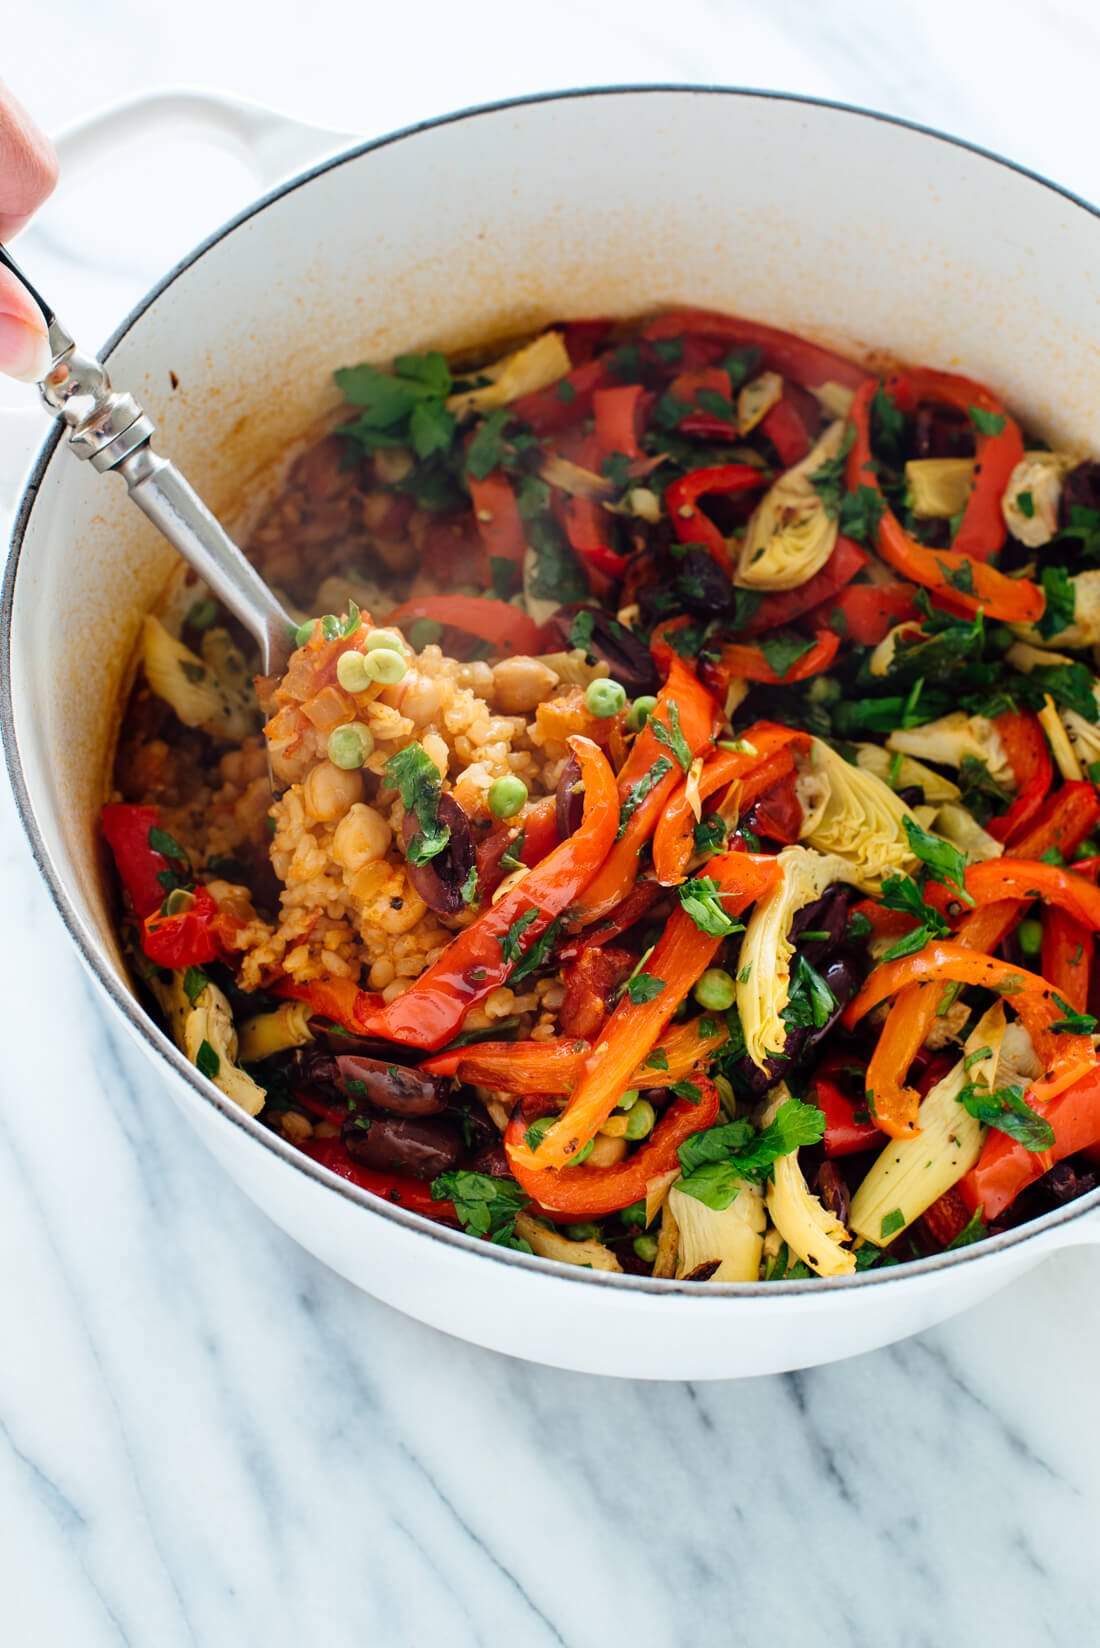 Serve up this hearty vegetable paella! It